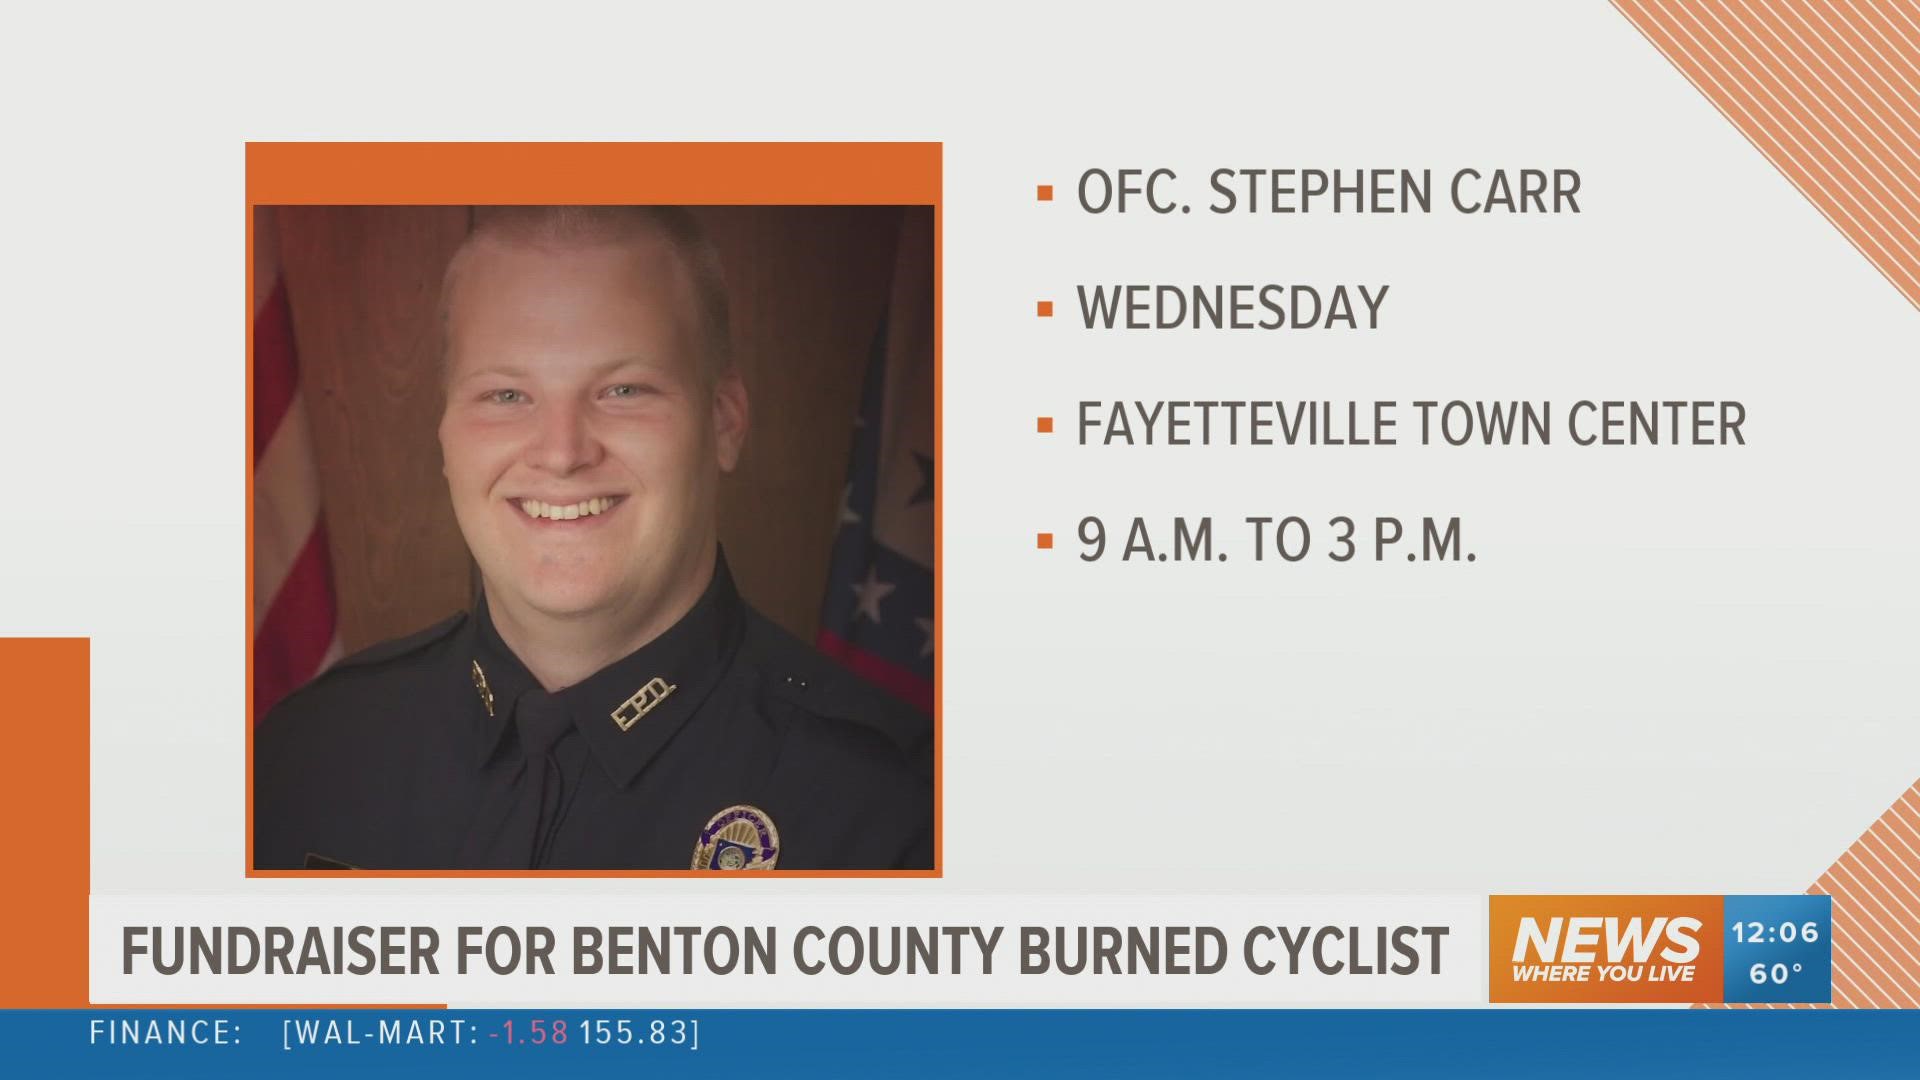 The blood drive in memory of Officer Carr will be held at the Fayetteville Town Center on Wednesday, April 13 from 9 a.m. to 3 p.m.